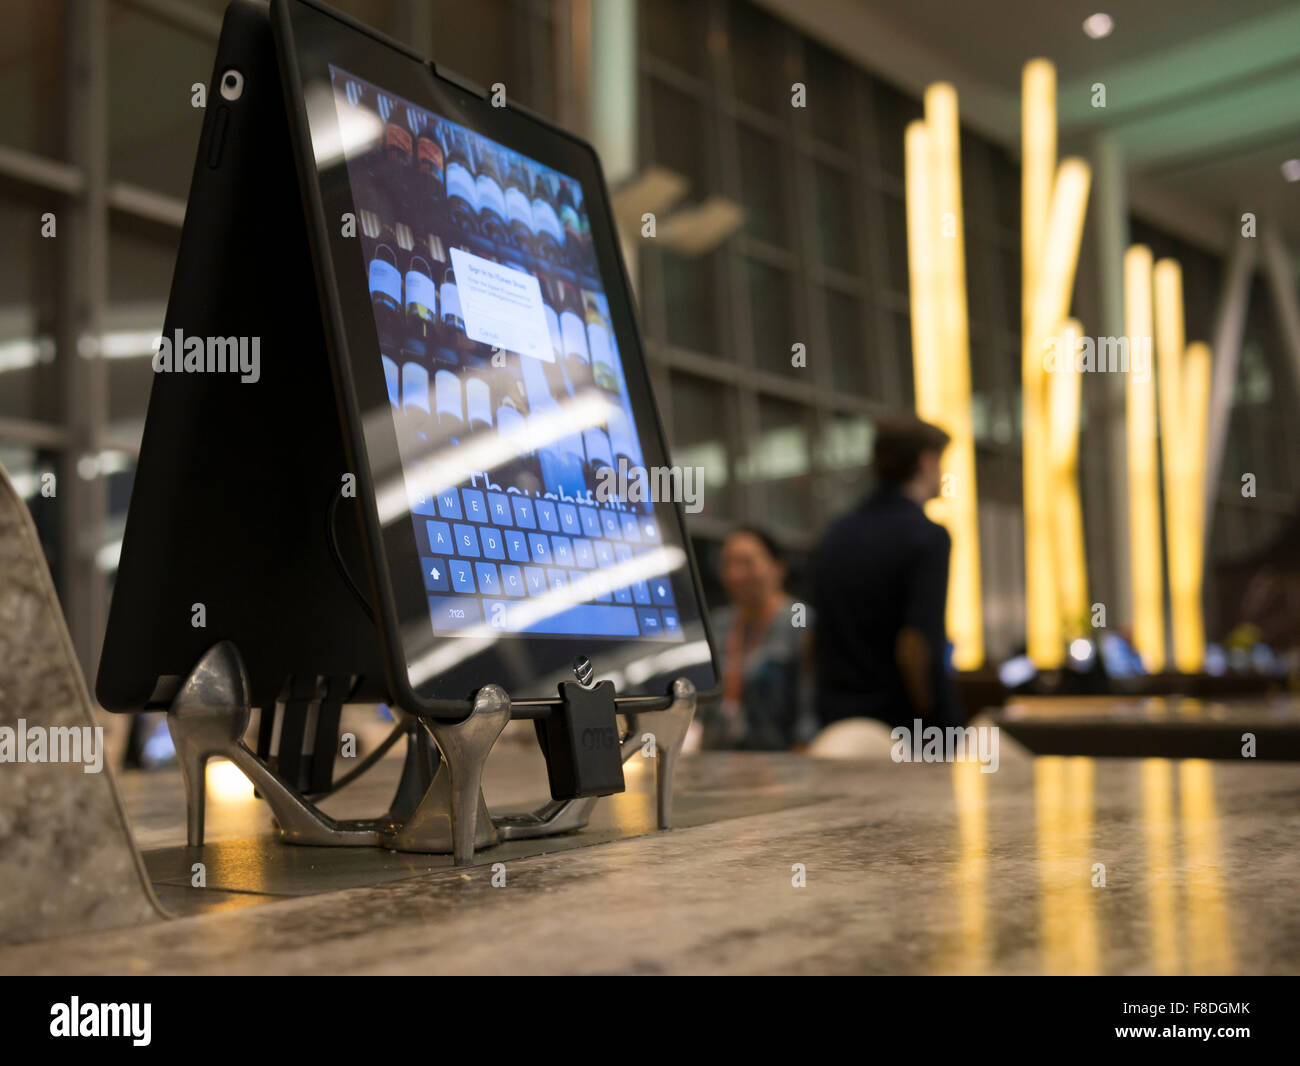 Toronto international airport Terminal 1 departure lounge food court; modern and dining tables connected with tablets and iPads Stock Photo